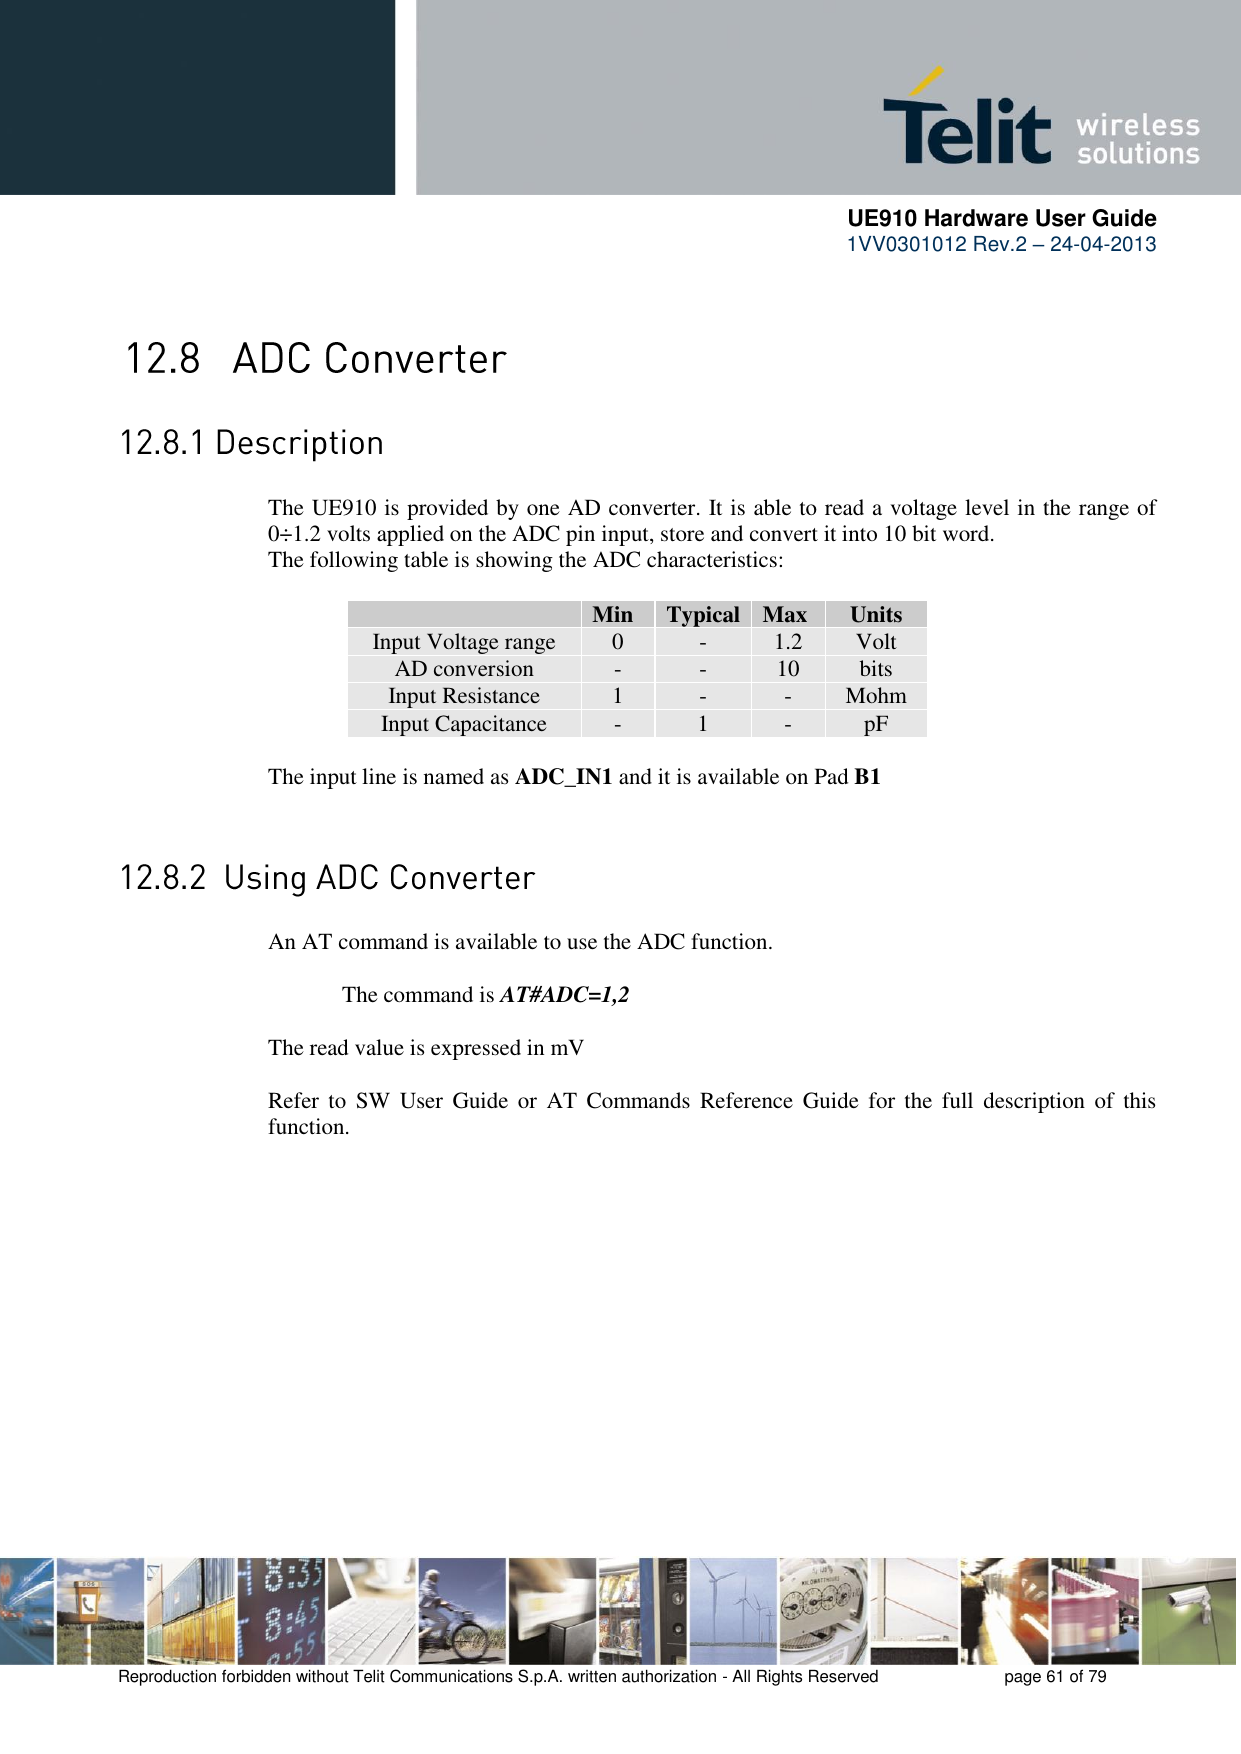      UE910 Hardware User Guide  1VV0301012 Rev.2 – 24-04-2013    Reproduction forbidden without Telit Communications S.p.A. written authorization - All Rights Reserved    page 61 of 79    The UE910 is provided by one AD converter. It is able to read a voltage level in the range of 0÷1.2 volts applied on the ADC pin input, store and convert it into 10 bit word.  The following table is showing the ADC characteristics:   Min Typical Max Units Input Voltage range 0 - 1.2 Volt AD conversion - - 10 bits Input Resistance 1 - - Mohm Input Capacitance  - 1 - pF  The input line is named as ADC_IN1 and it is available on Pad B1    An AT command is available to use the ADC function.  The command is AT#ADC=1,2  The read value is expressed in mV  Refer  to  SW  User  Guide or  AT  Commands  Reference  Guide for the  full description of  this function. 